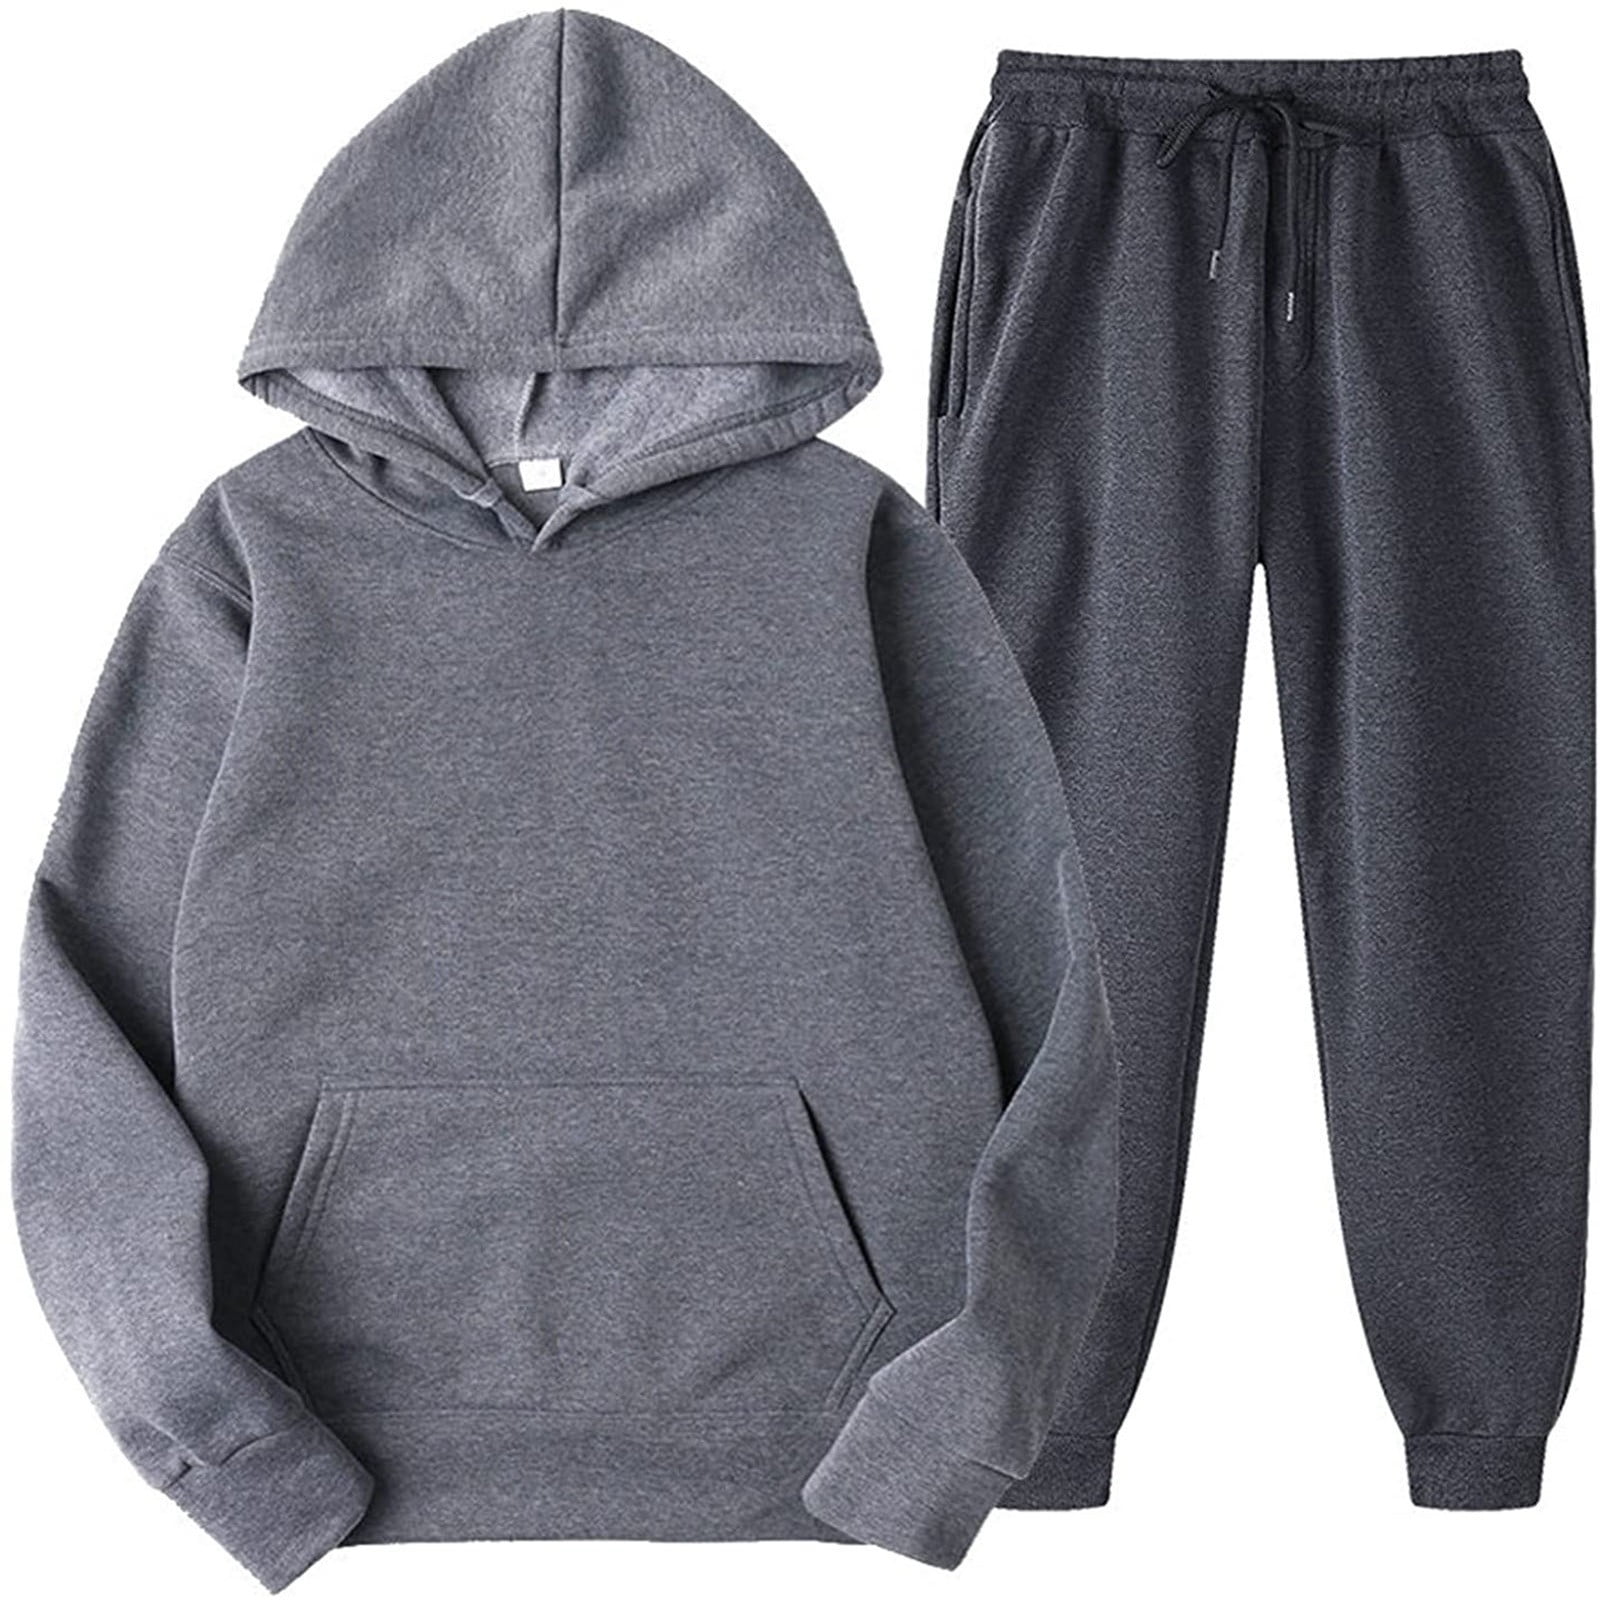 2 Piece Workout Outfits for Women Men Casual Solid Color Long Sleeve Hoodie  Sweatshirt and Sweatpants Set Sweatsuit - Walmart.com